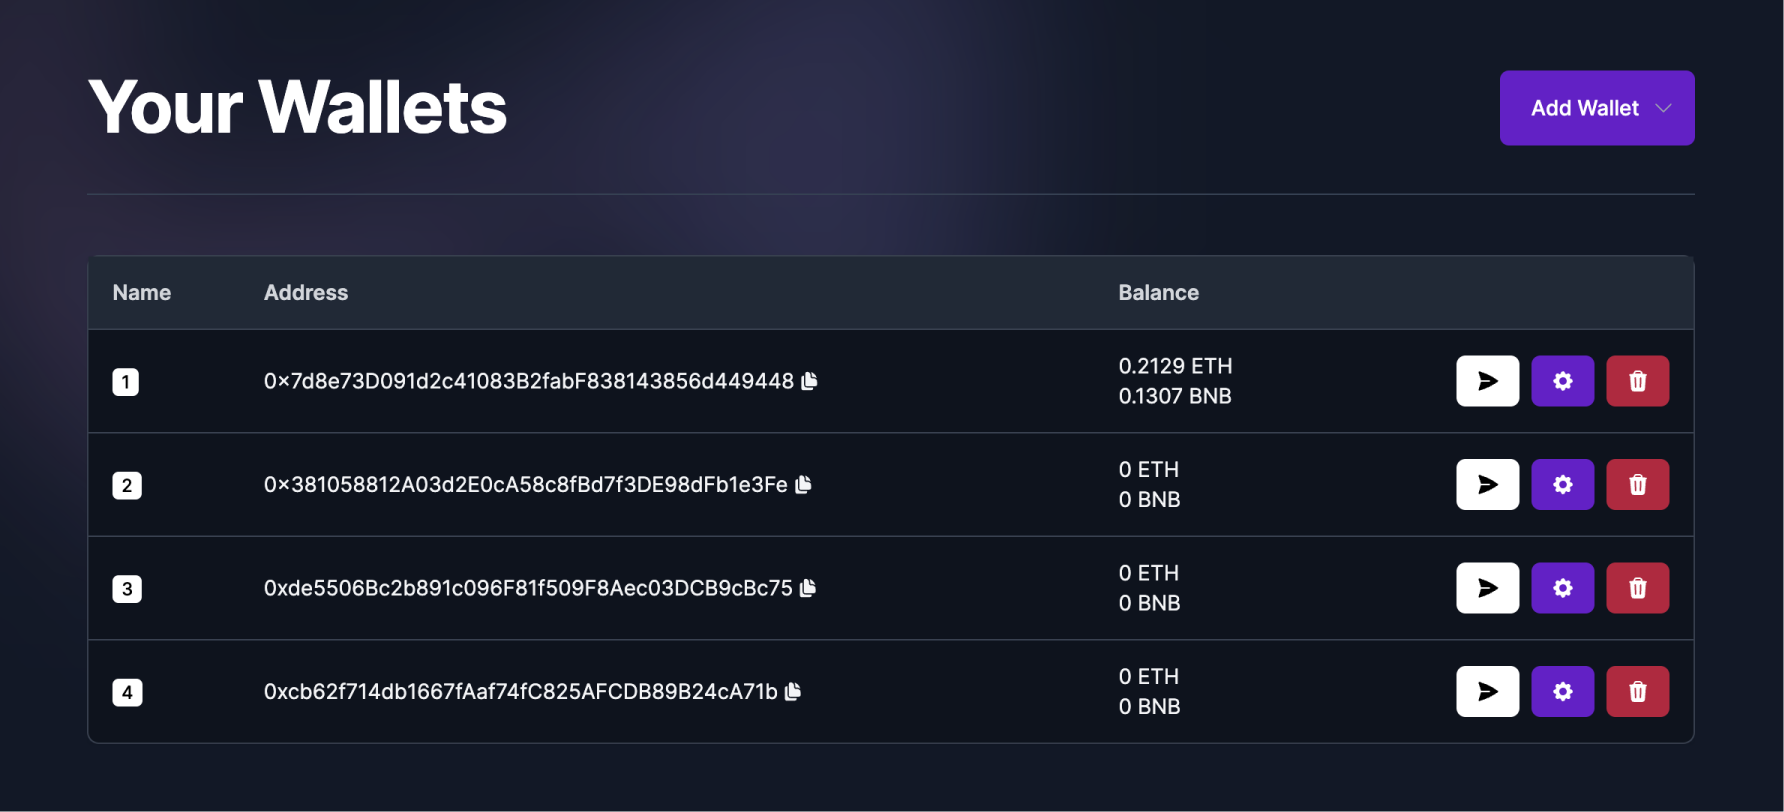 Multiple Trading Wallets - Manage various trading wallets efficiently for diversified strategies